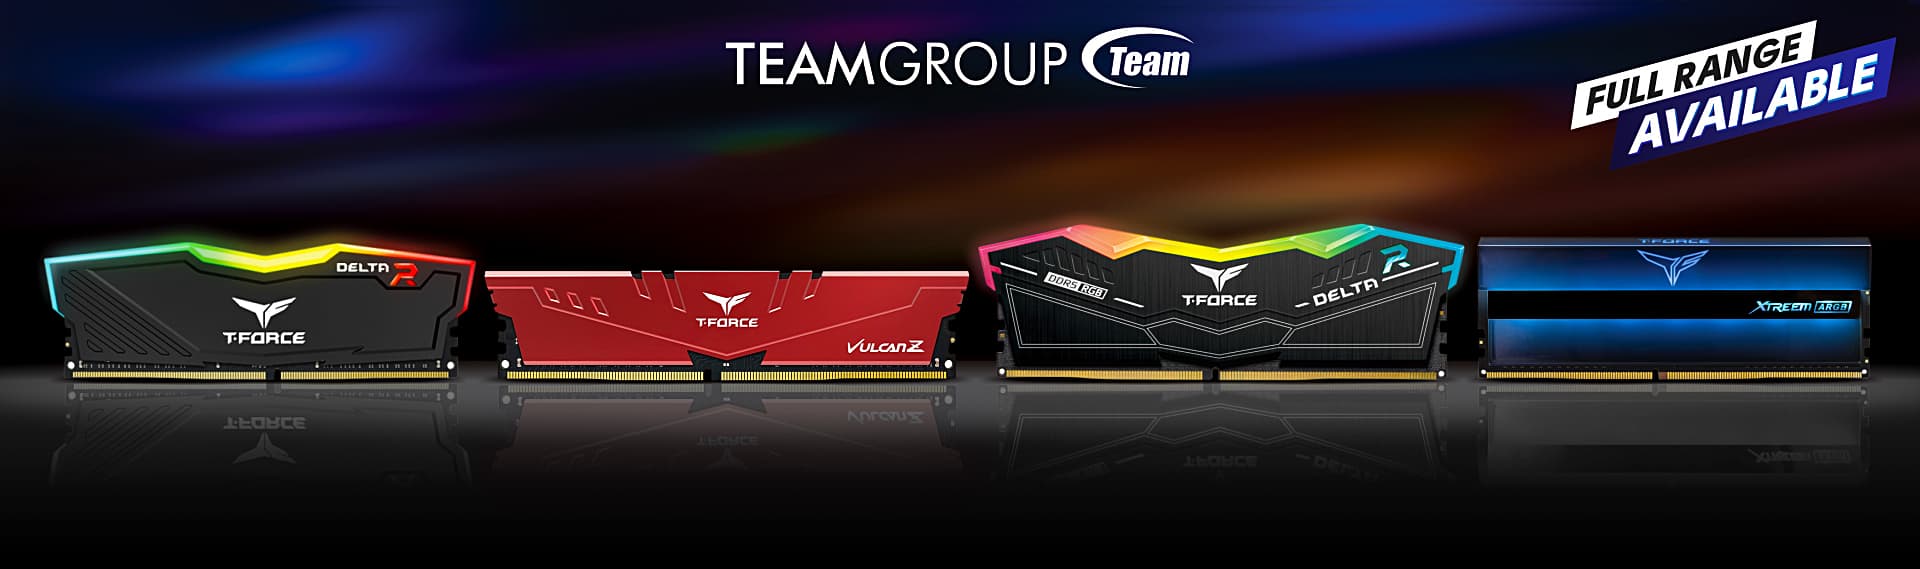 teamgroup-brand-page